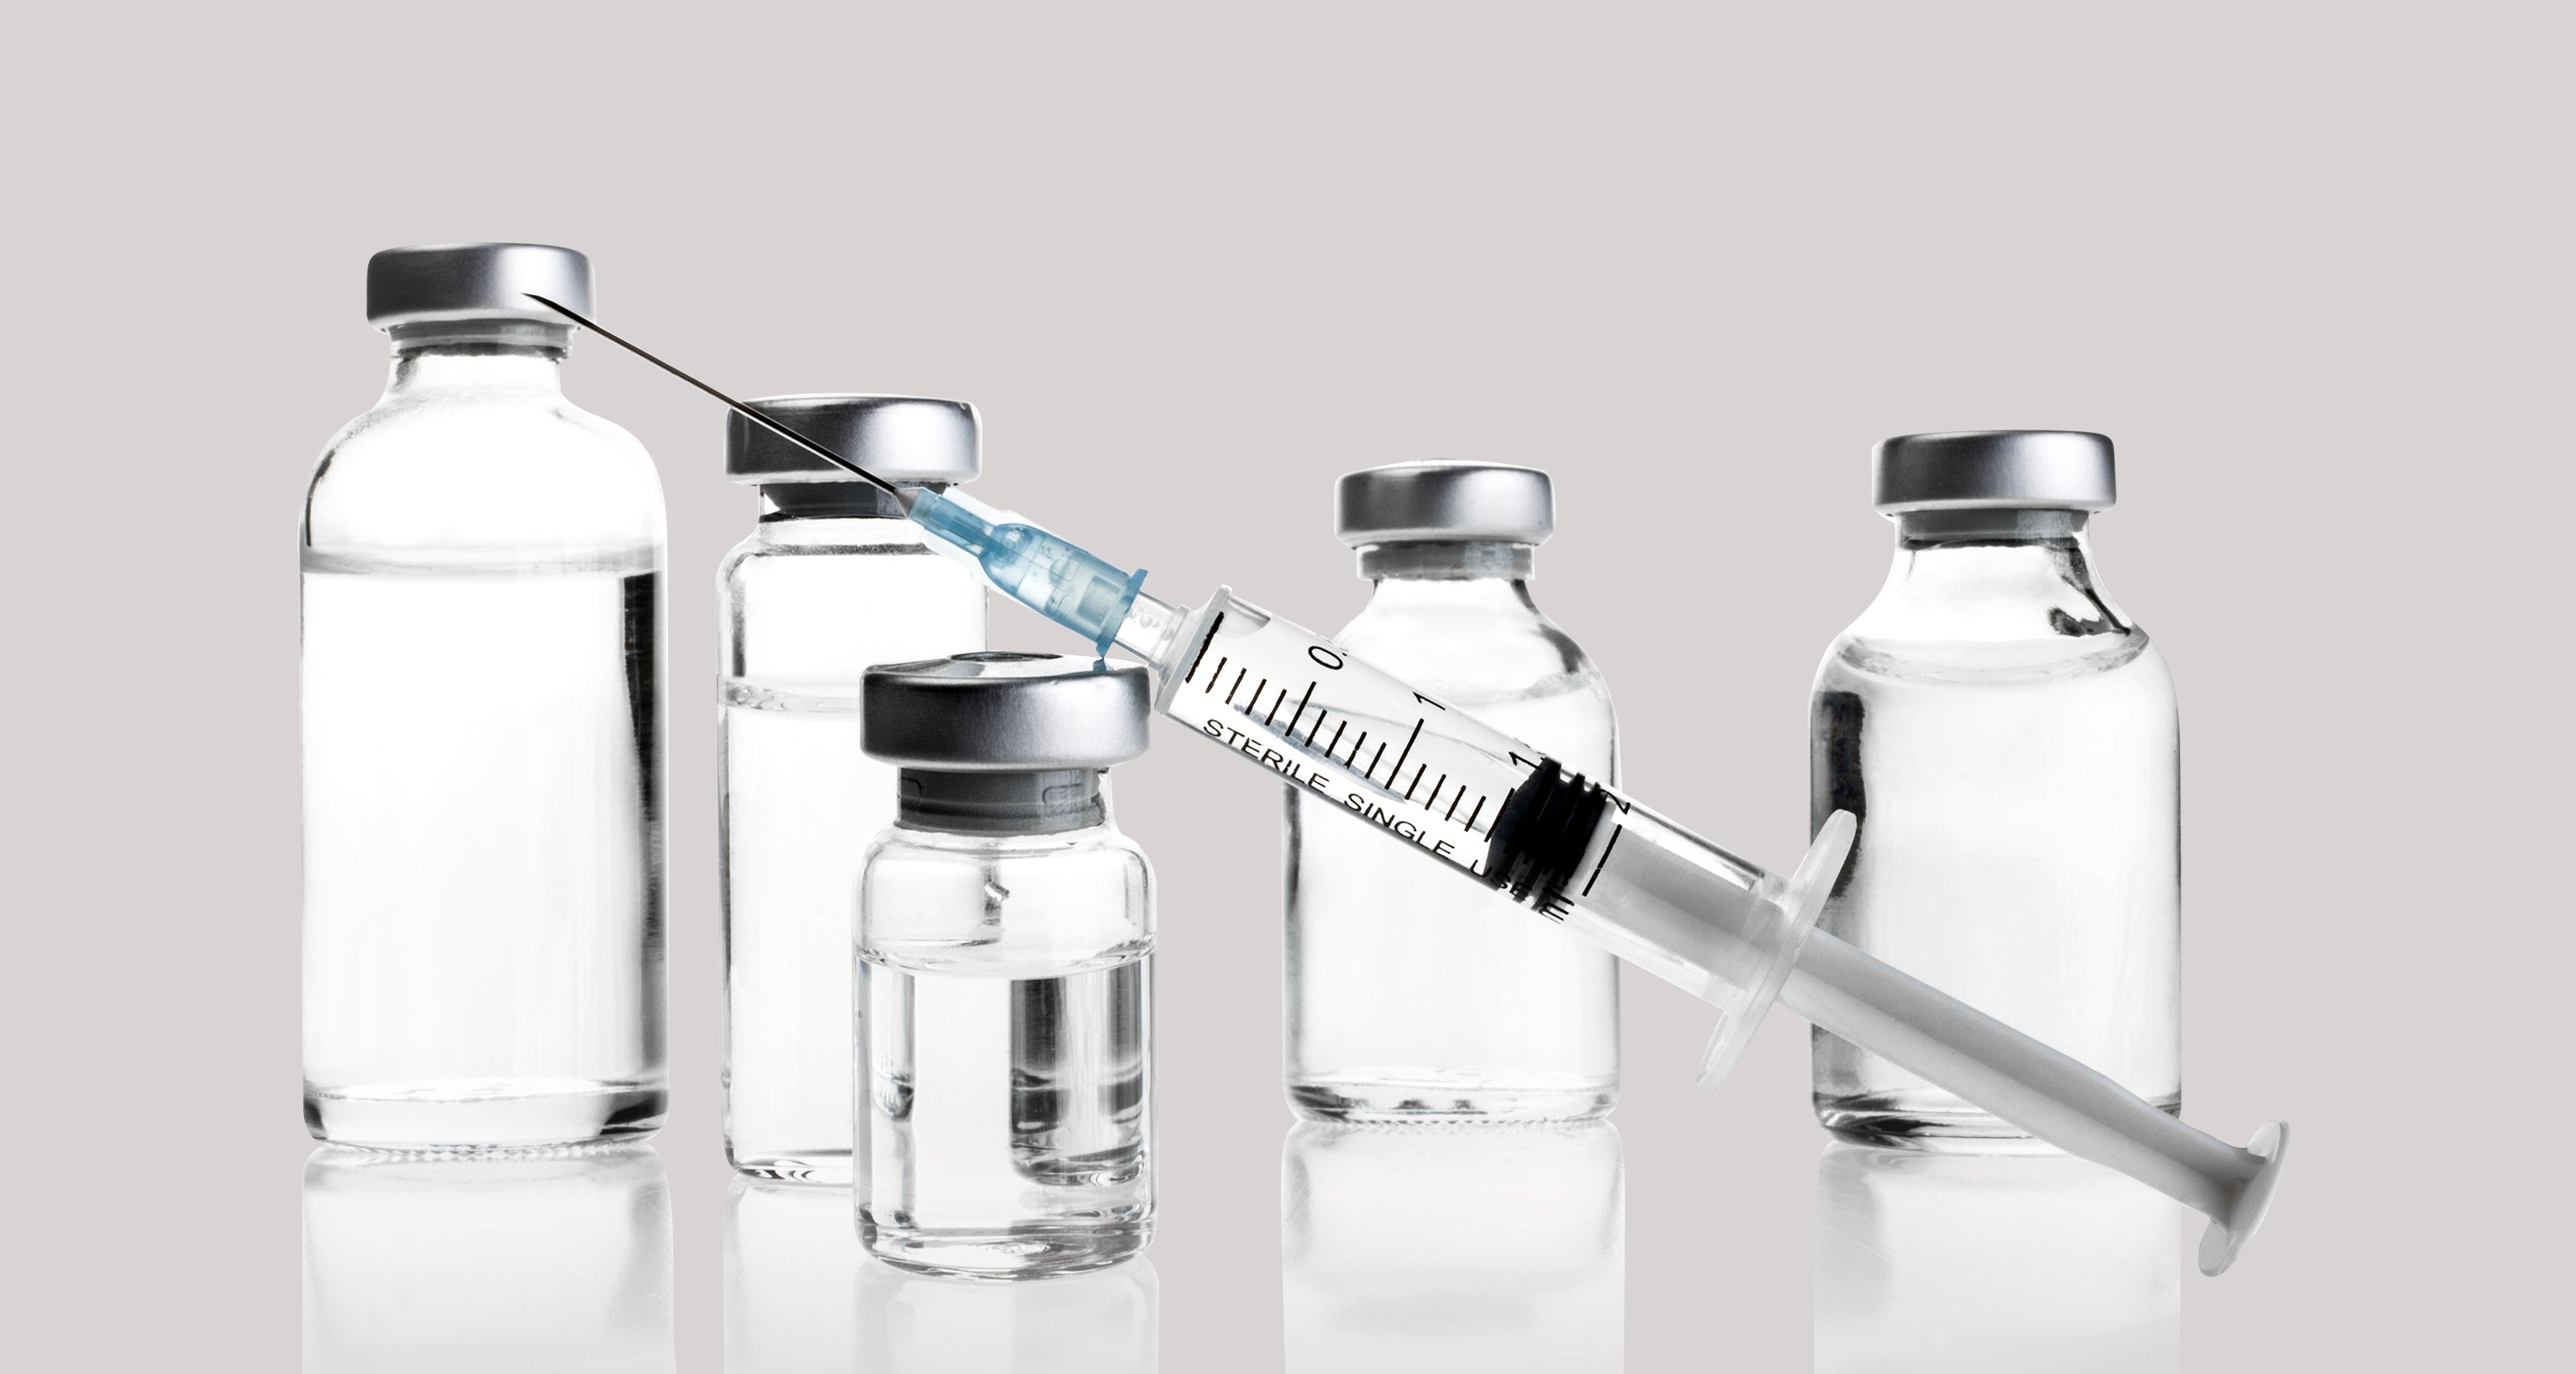 Factors affecting Botox injection site duration